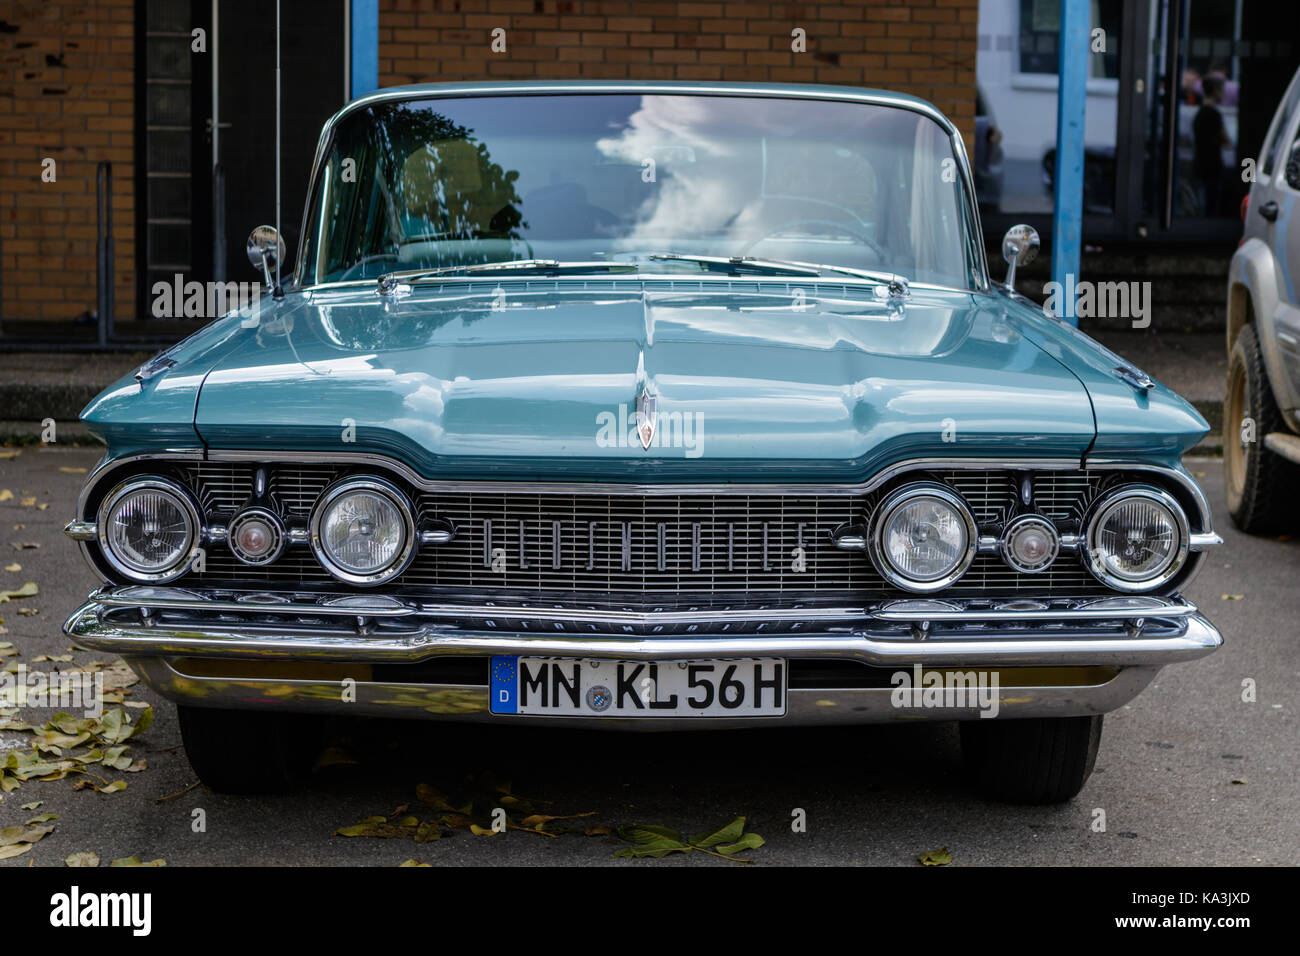 Laupheim, Germany - September 24, 2017: Oldsmobile 98 oldtimer car at the US Car Meeting event on September 24, 2017 in Laupheim, Germany. Stock Photo